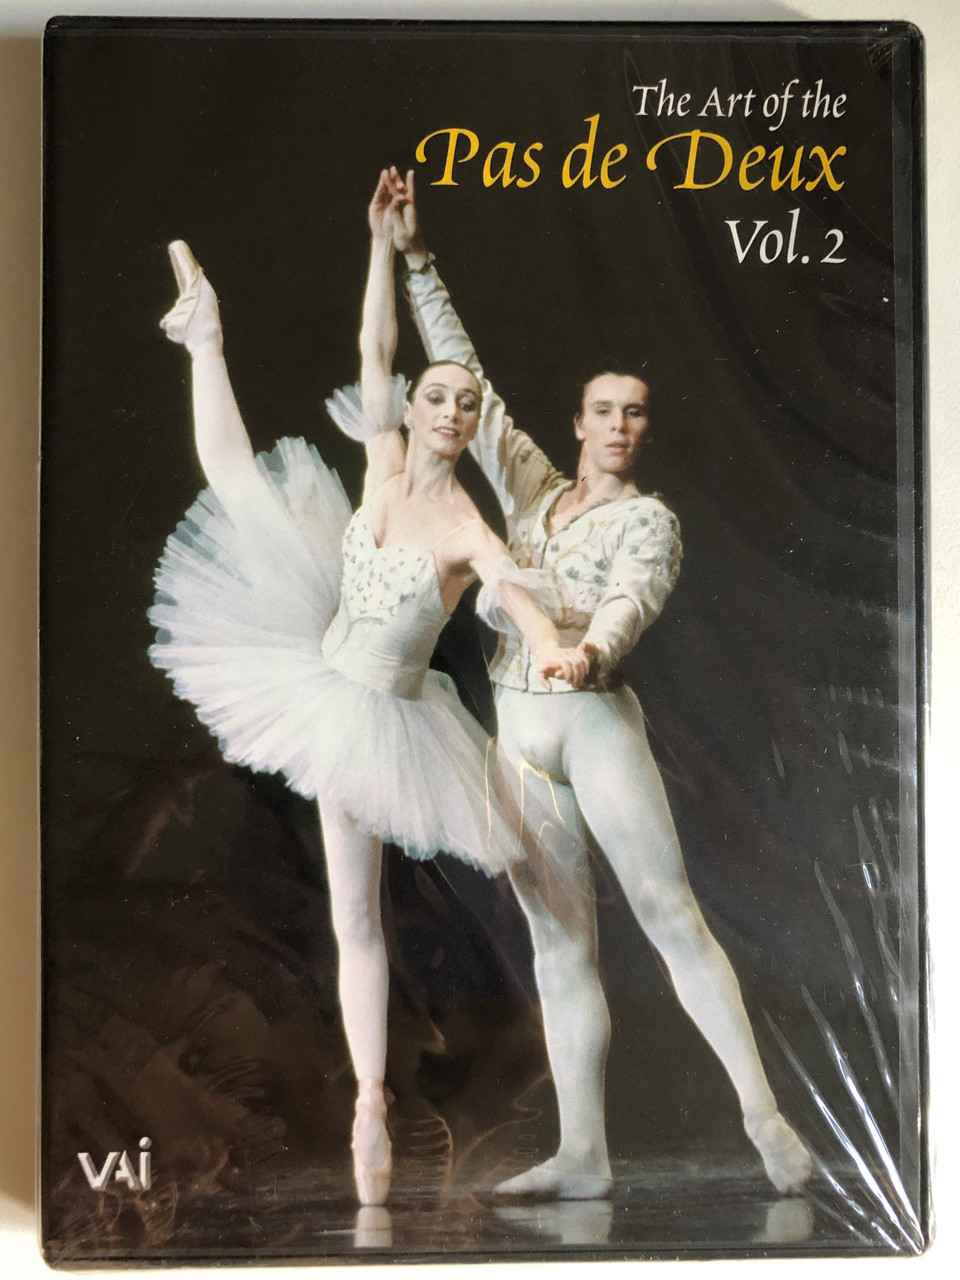 The_Art_of_the_Pas_de_Deux_Vol._2_BIG_STEP_CLASSIC_Features_some_of_the_ballet_worlds_greatest_dancers_PACKAGING_DESIGN_AND_DVD_AUTHORING_2006_VIDEO_ARTISTS_INTERNATIONAL___79677.1691646919.1280.1280.JPG (960×1280)